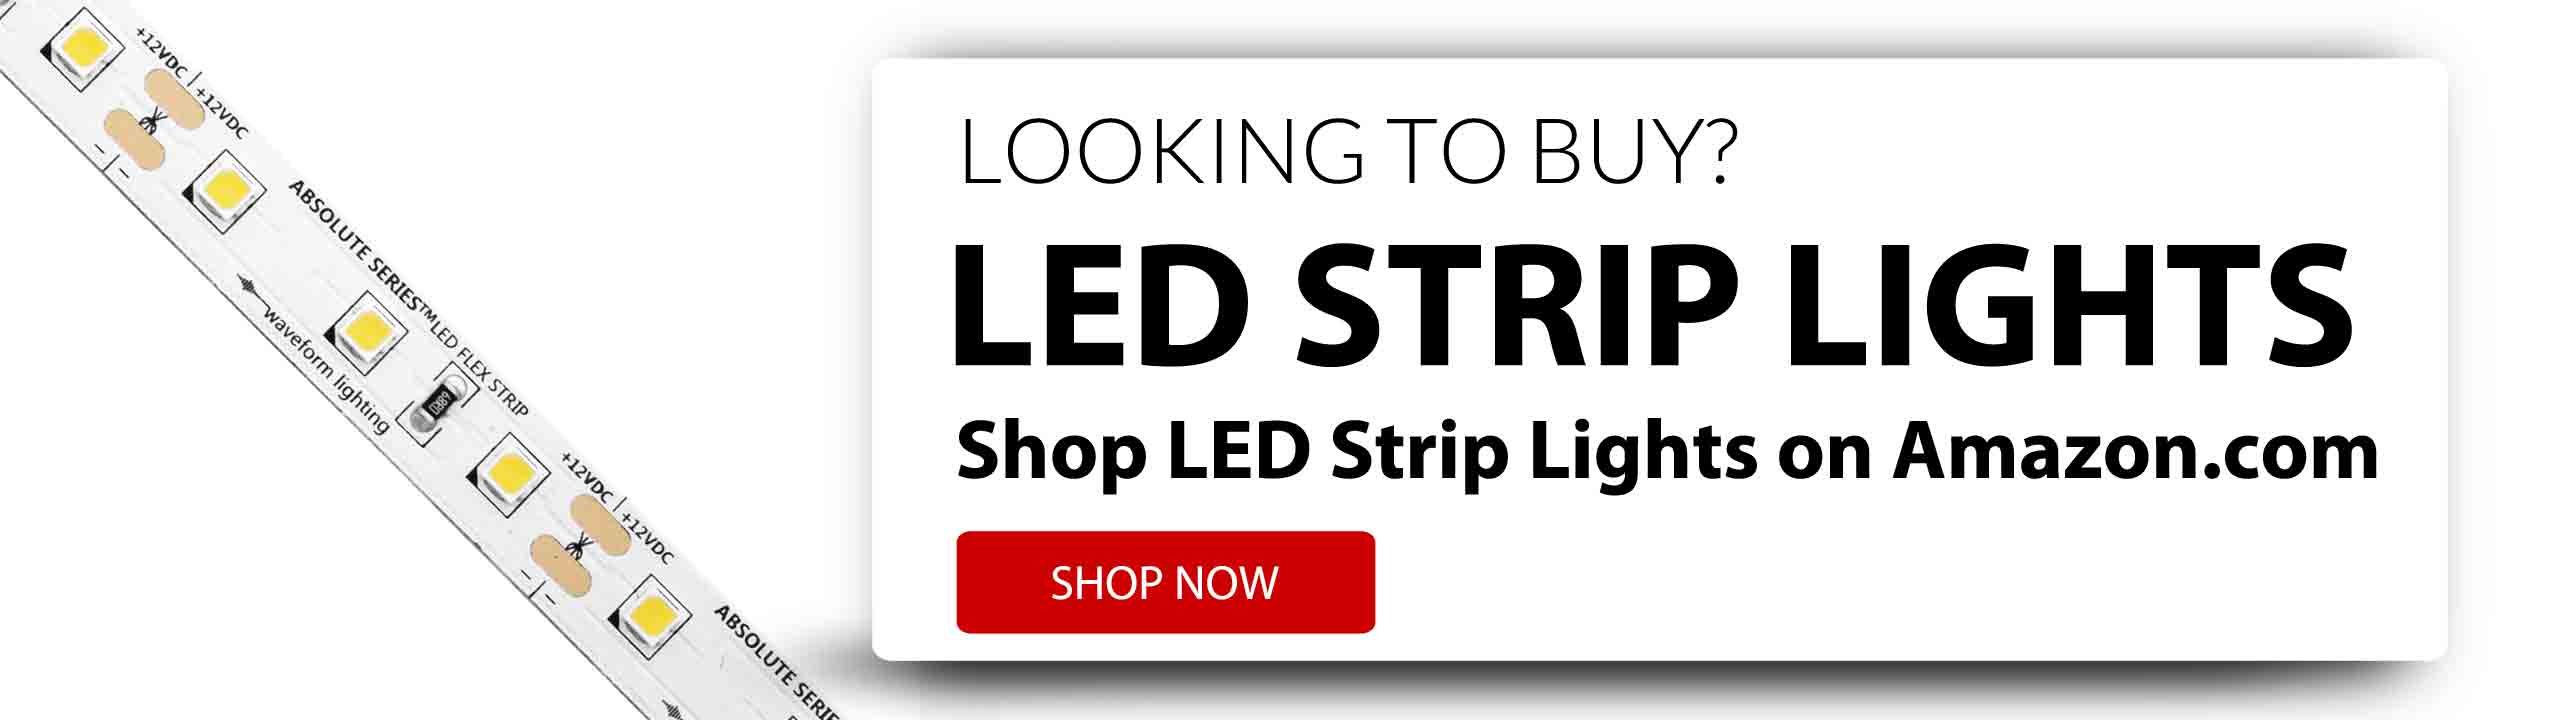 My LED strip lights are not working – InStyle's LED troubleshooting guide